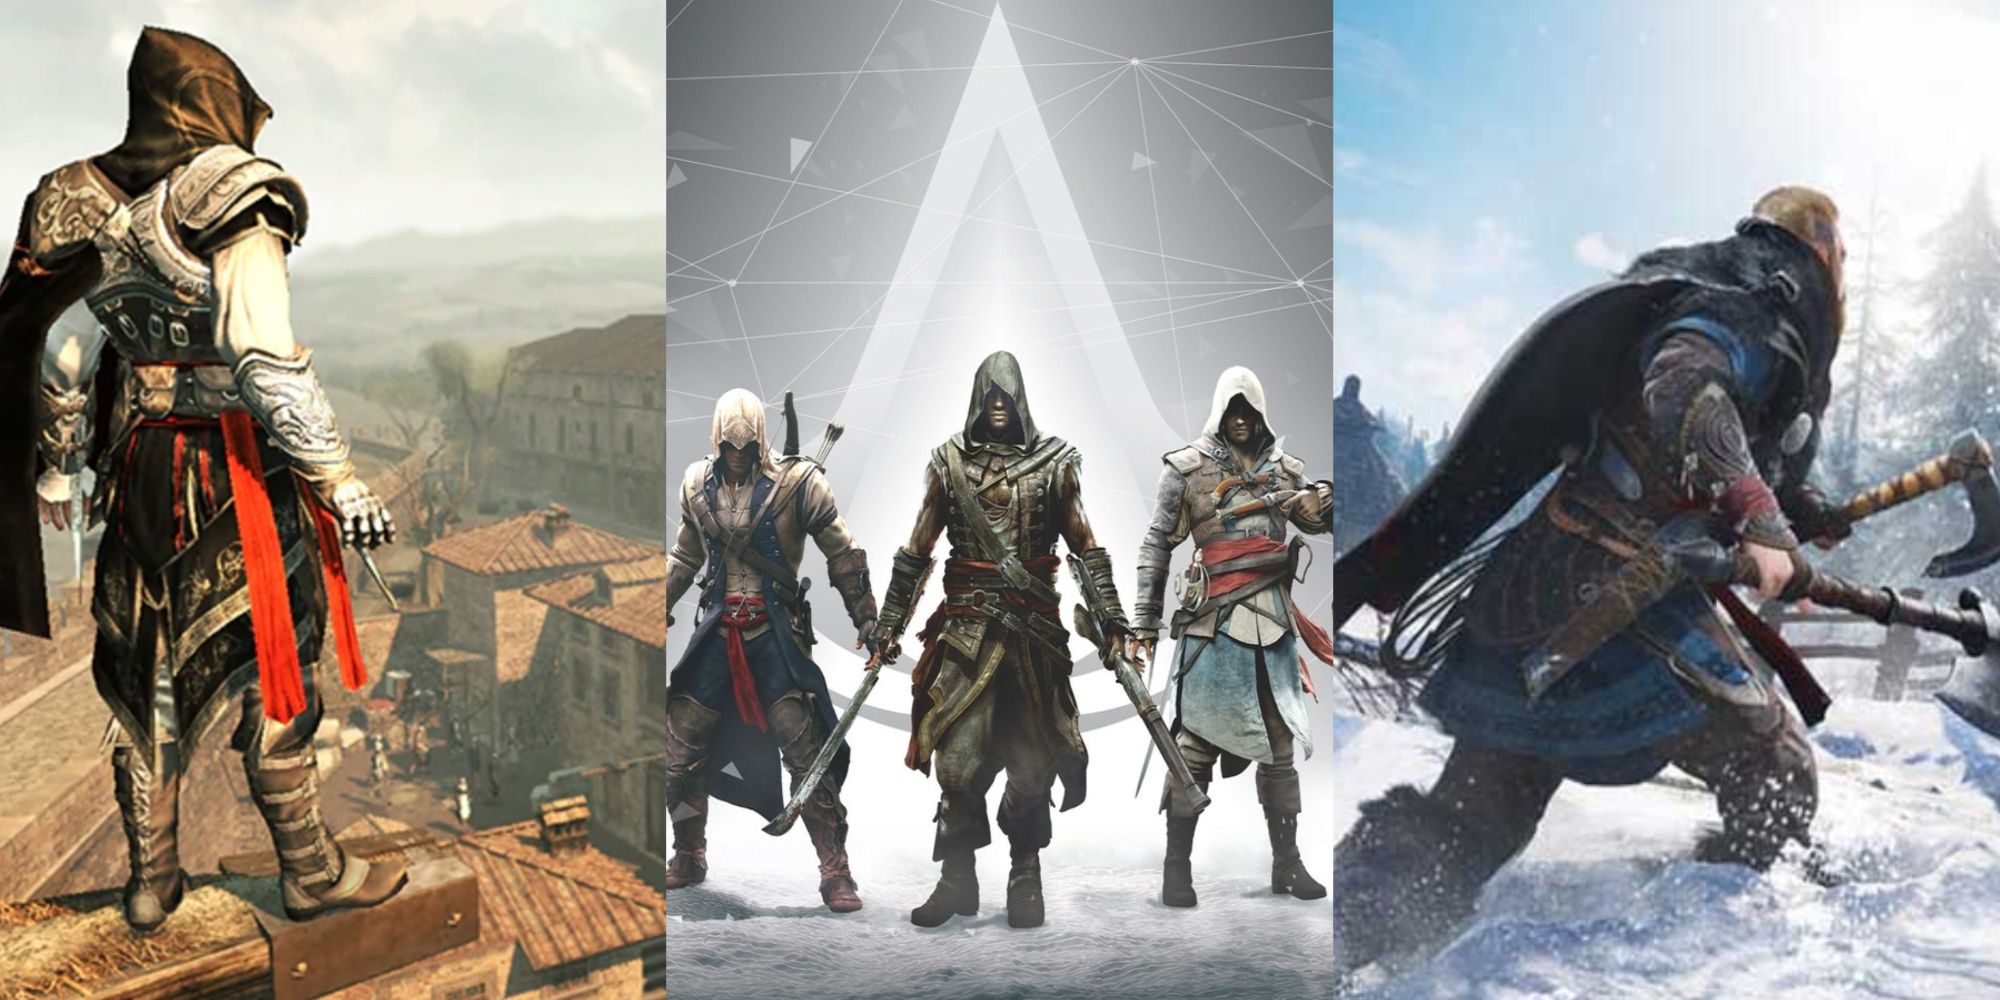 Assassin's Creed: 10 Most Important Facts We Know About Assassin's Creed Infinity (So Far) 